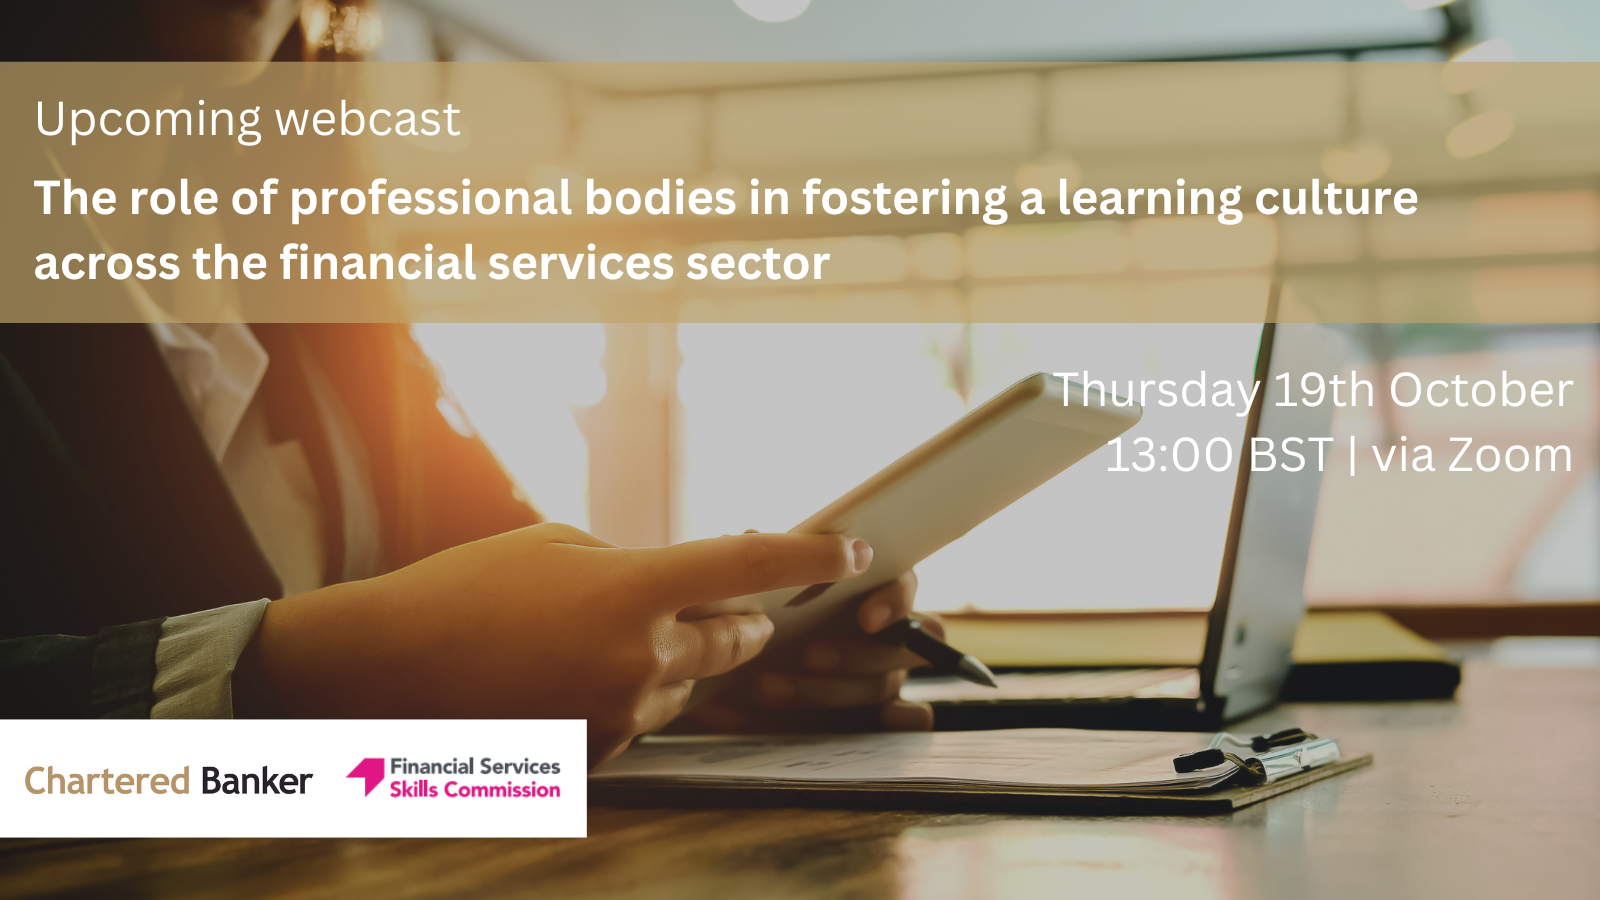 The role of professional bodies in fostering a learning culture across the financial services sector